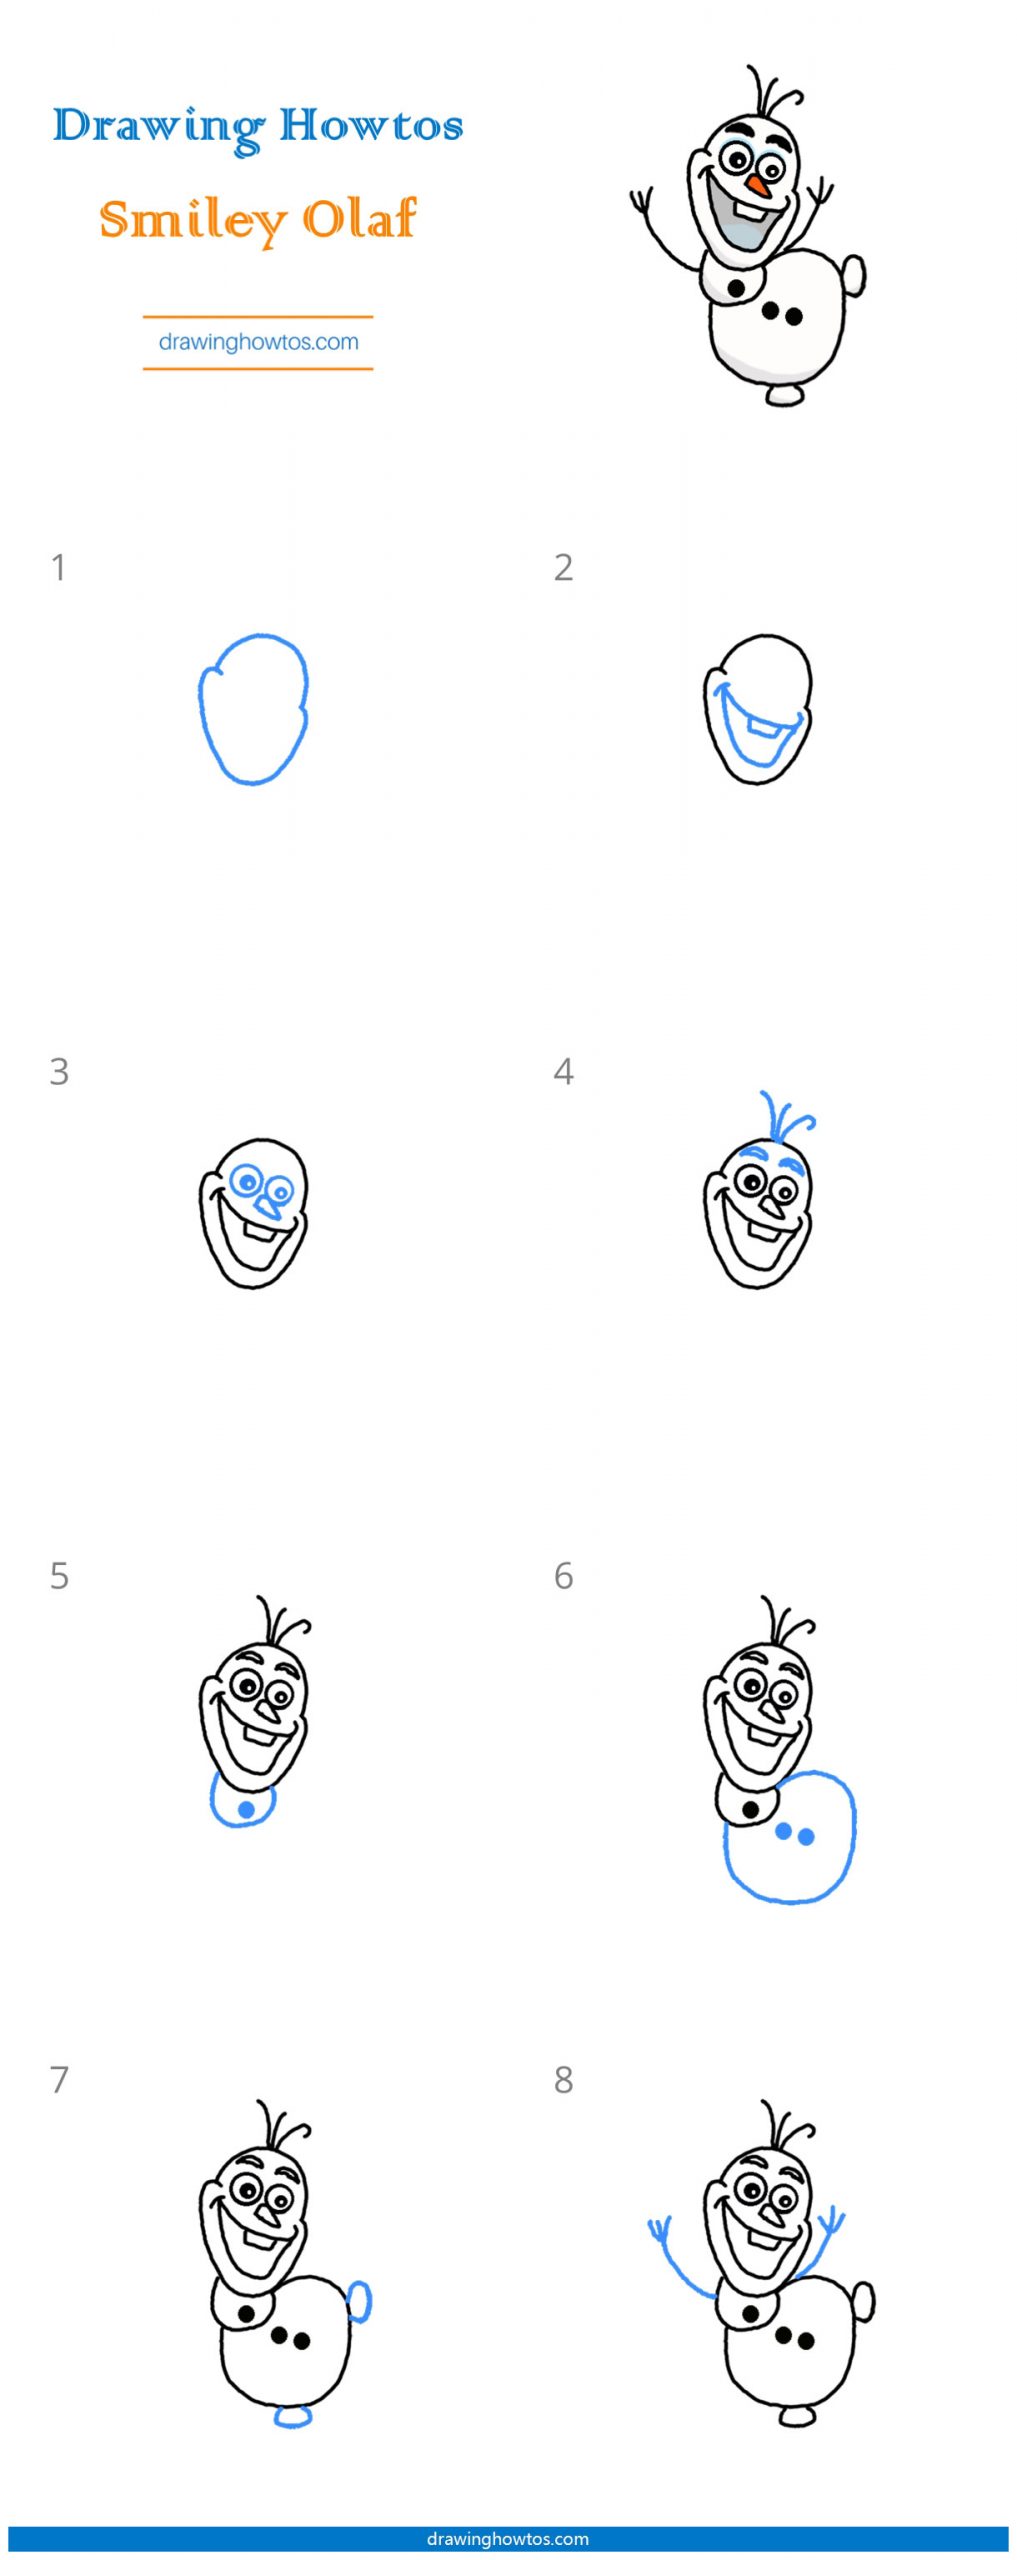 How to Draw Smiley Olaf Step by Step